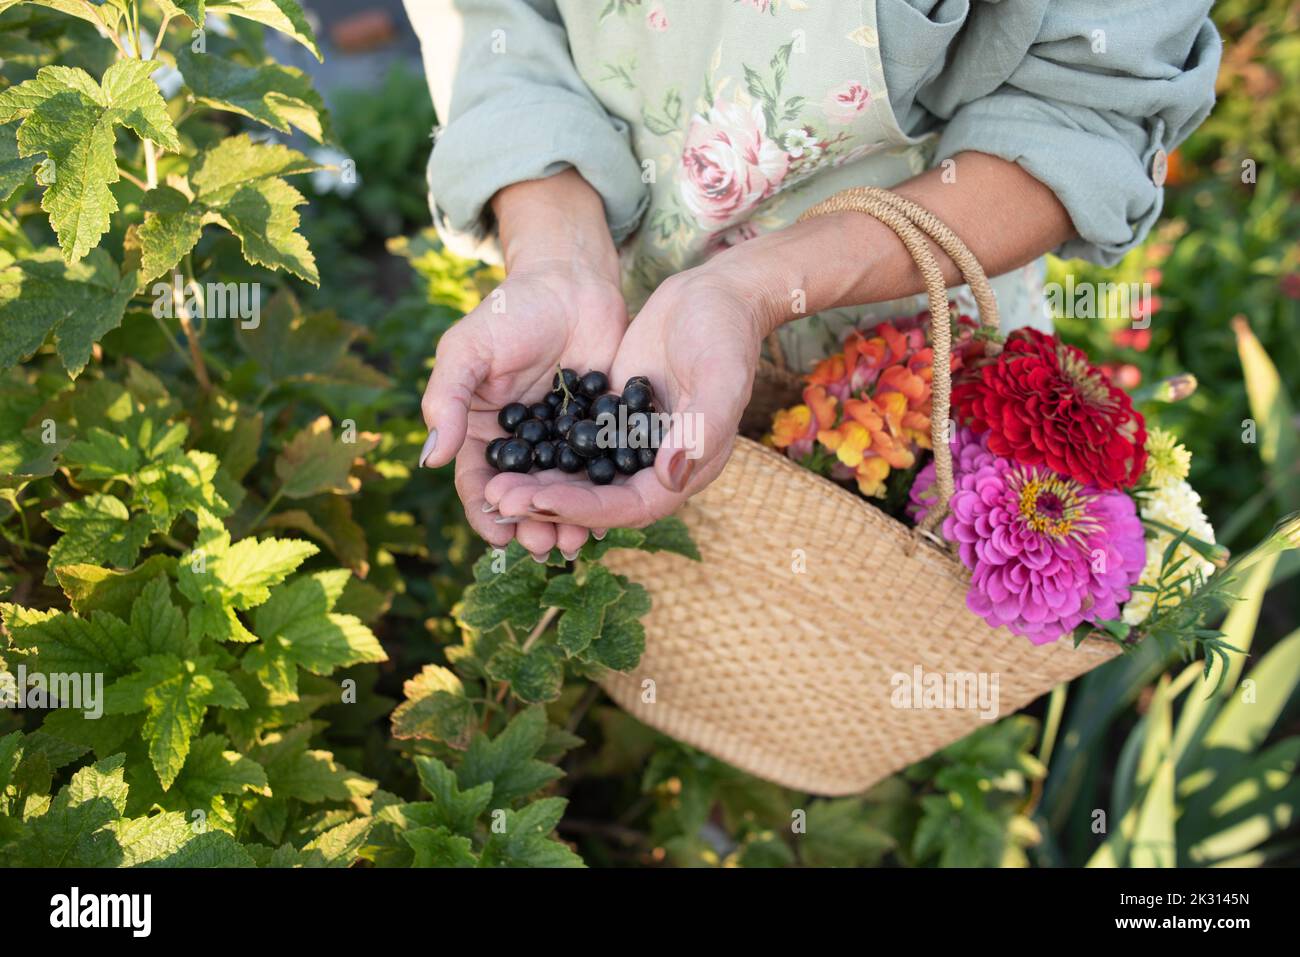 Senior woman with basket of flowers holding black currants in hand Stock Photo